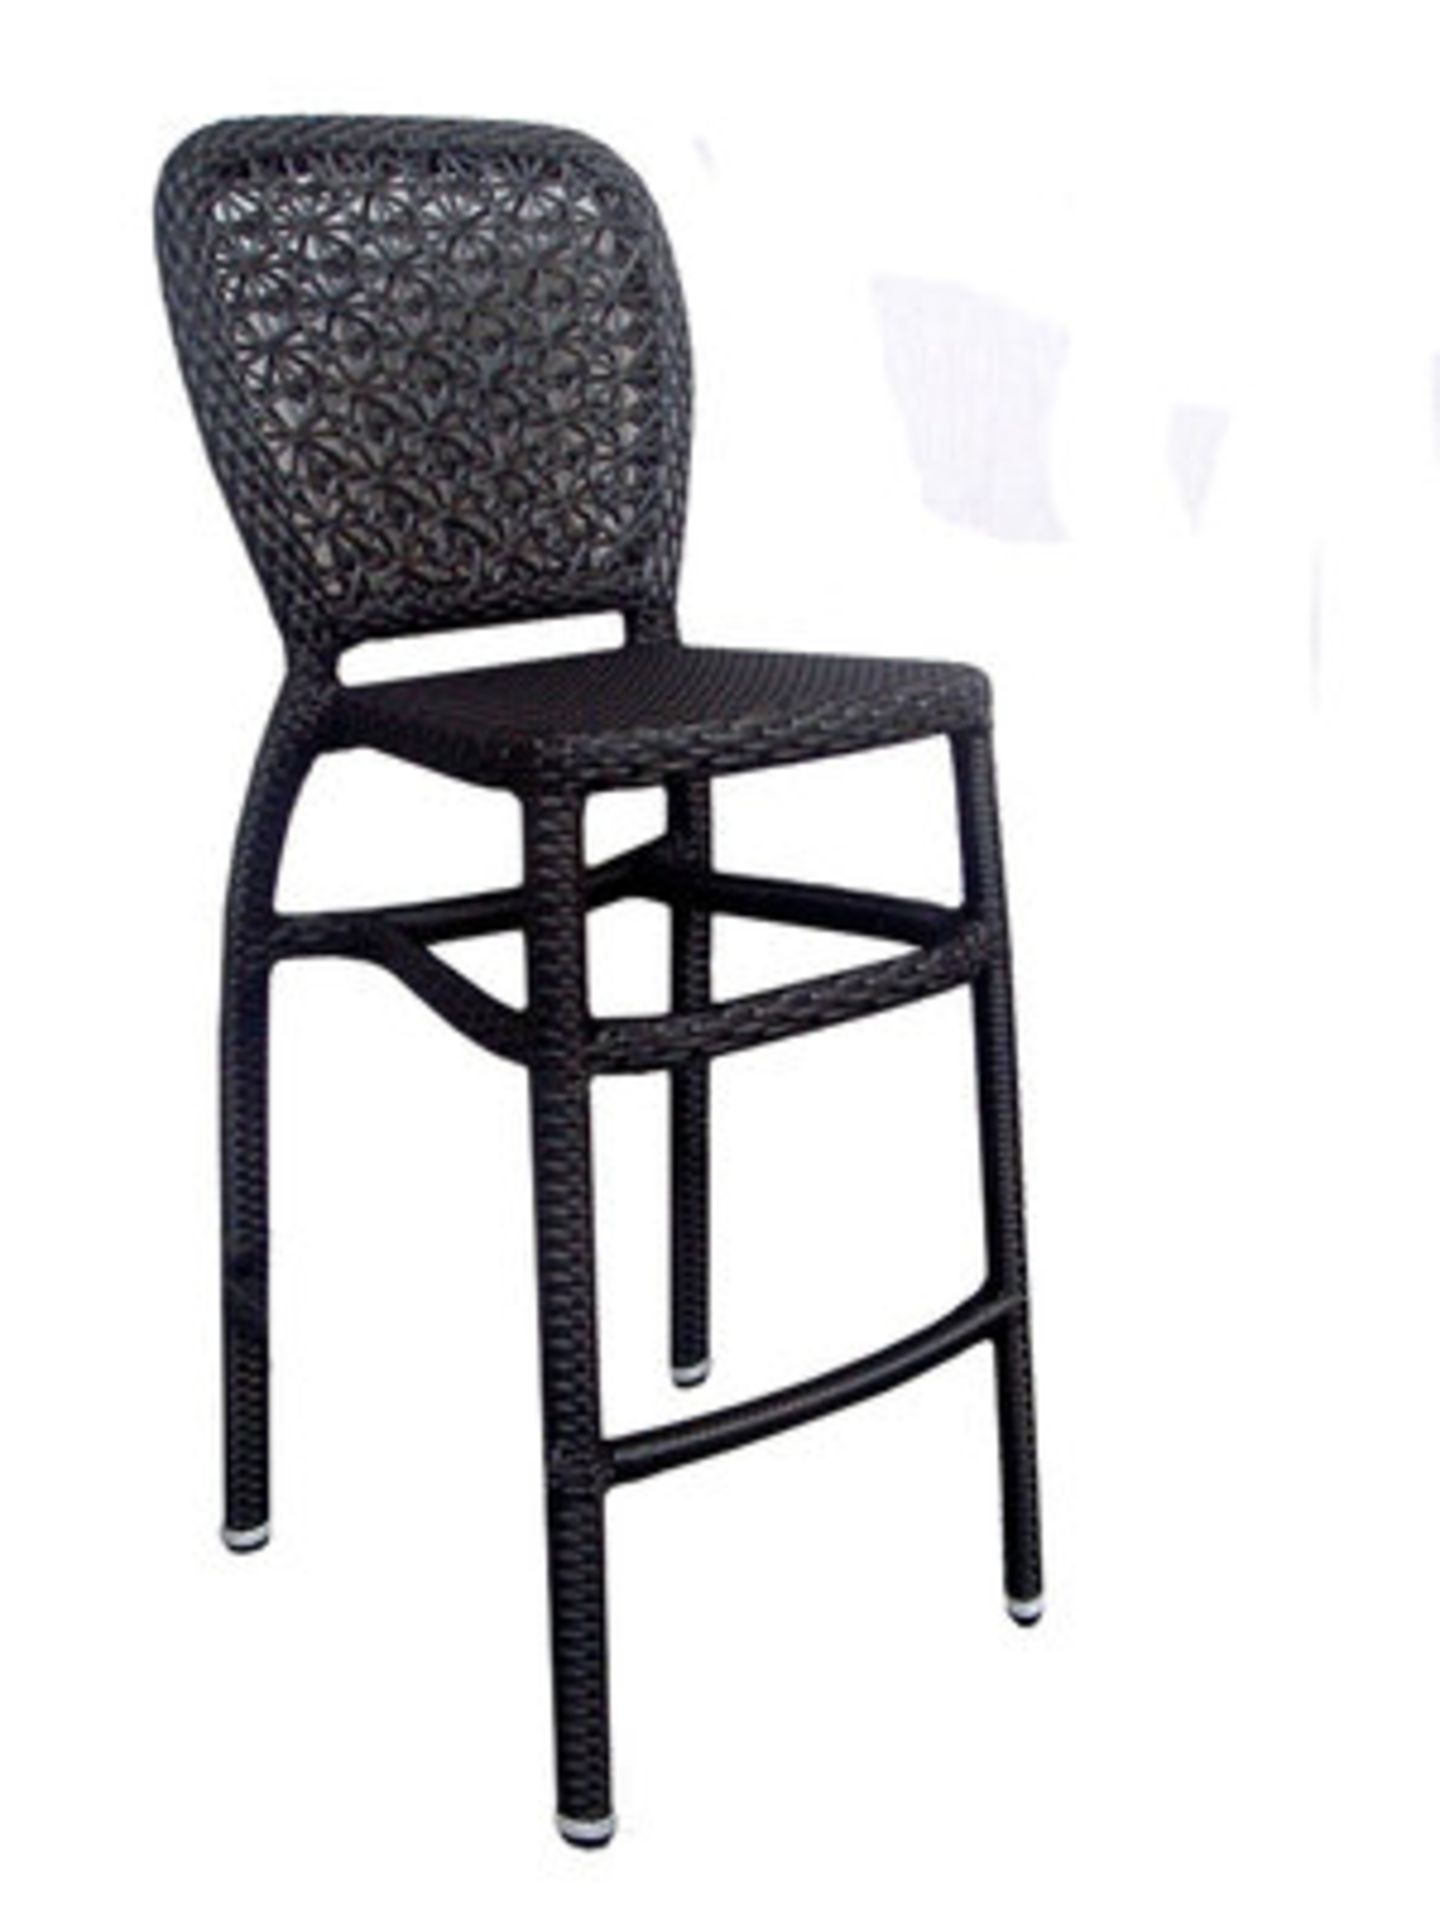 Jessie Barstool - Expresso, C09 JES BS EXP CH. Star Weave Back. 2 stacks with 6 each, plus 3